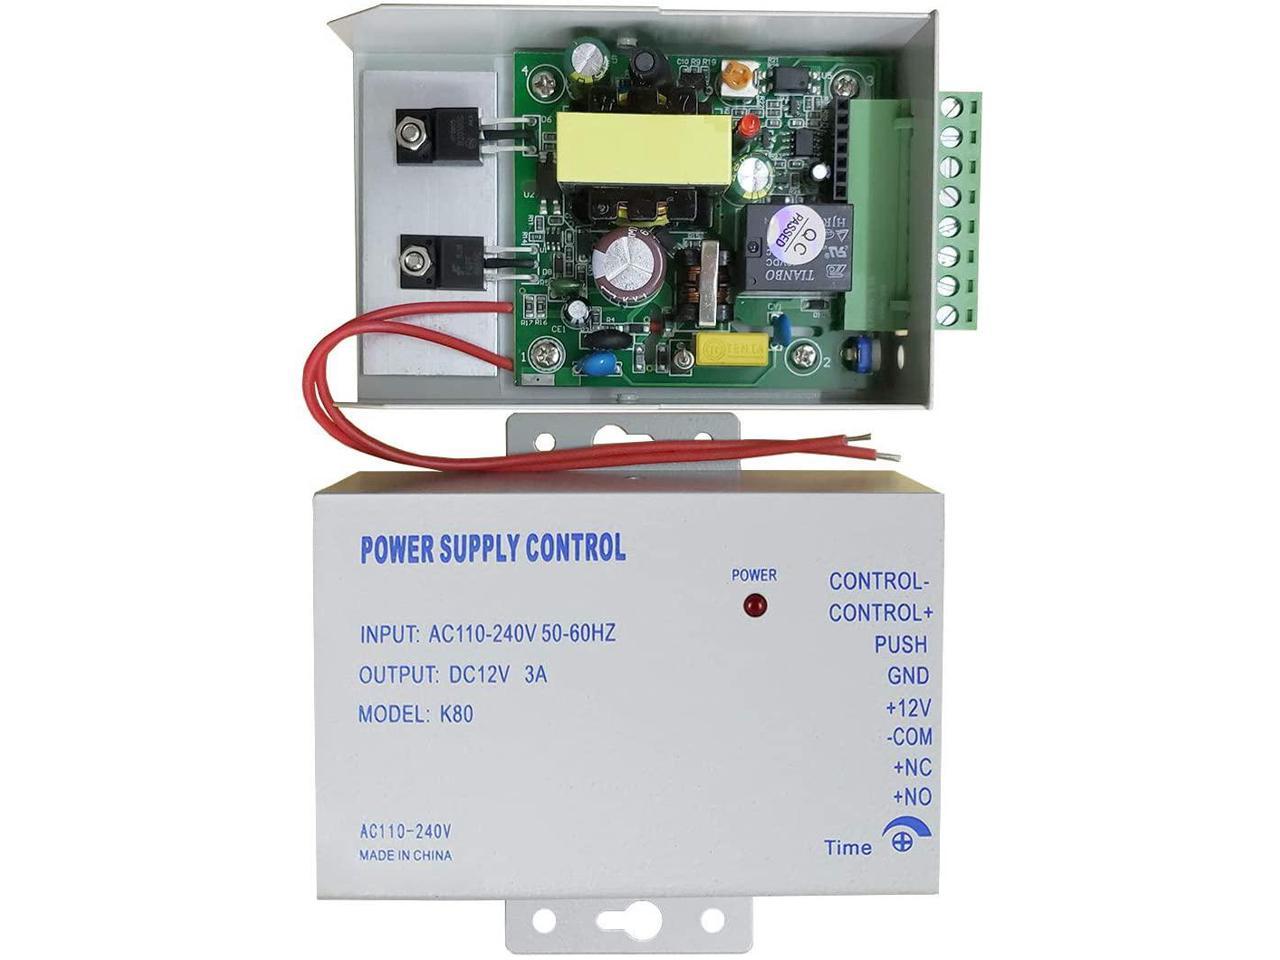 speed Leap single AMOCAM K80 Power Supply Control, AC 110-240V to DC 12V Power Supply for  Door Access Control System, Video Doorbell, Electric Strike Lock, Bolt  Lock, Magnetic Lock, Power Supply Controller - Newegg.com